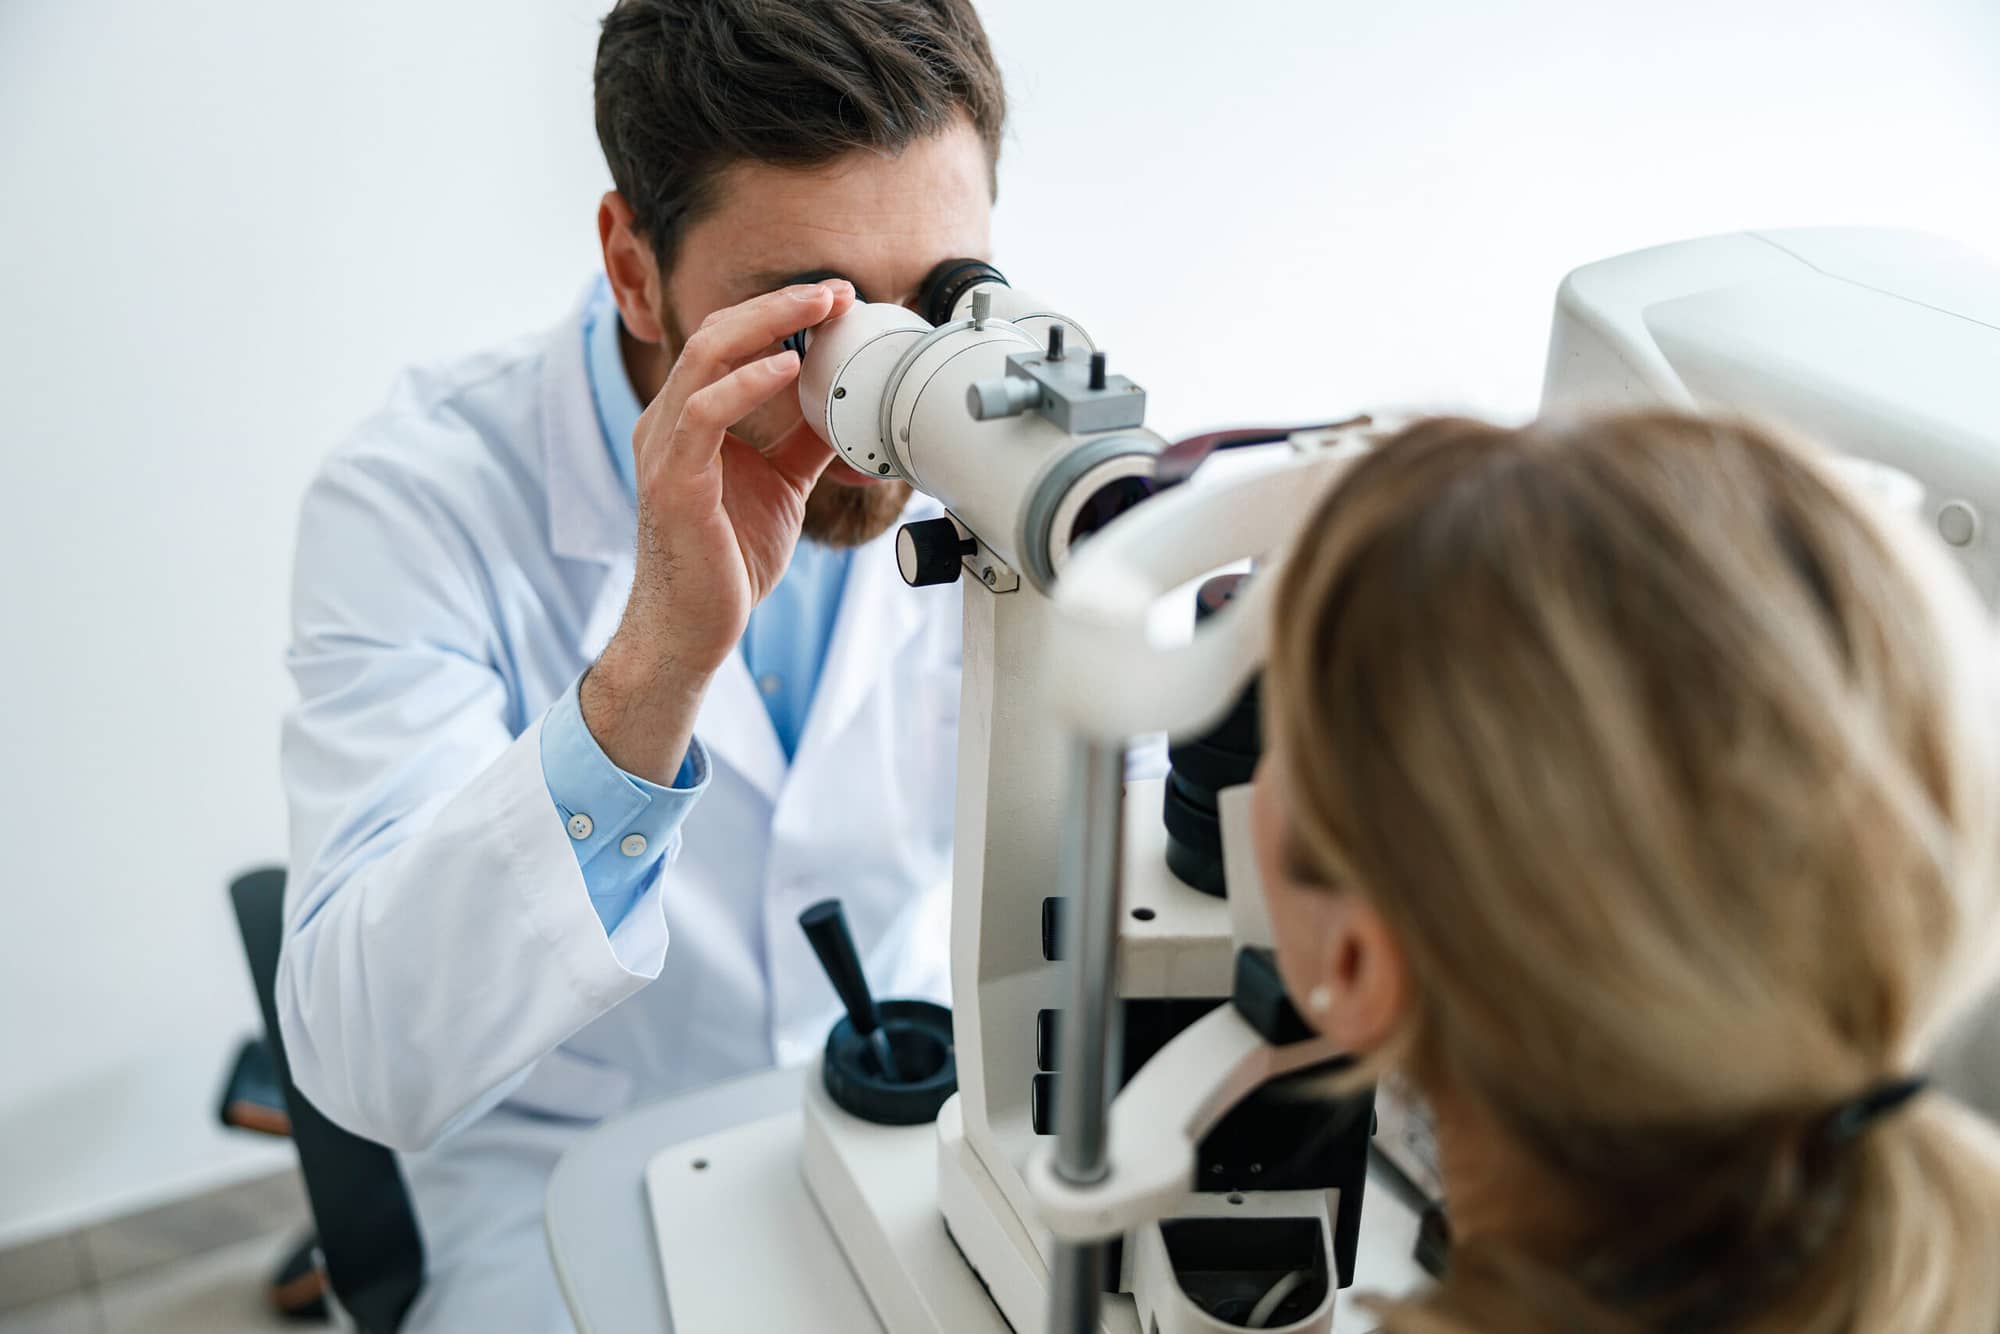 Optometrist checks the patient’s intraocular pressure in optician’s shop or ophthalmology clinic